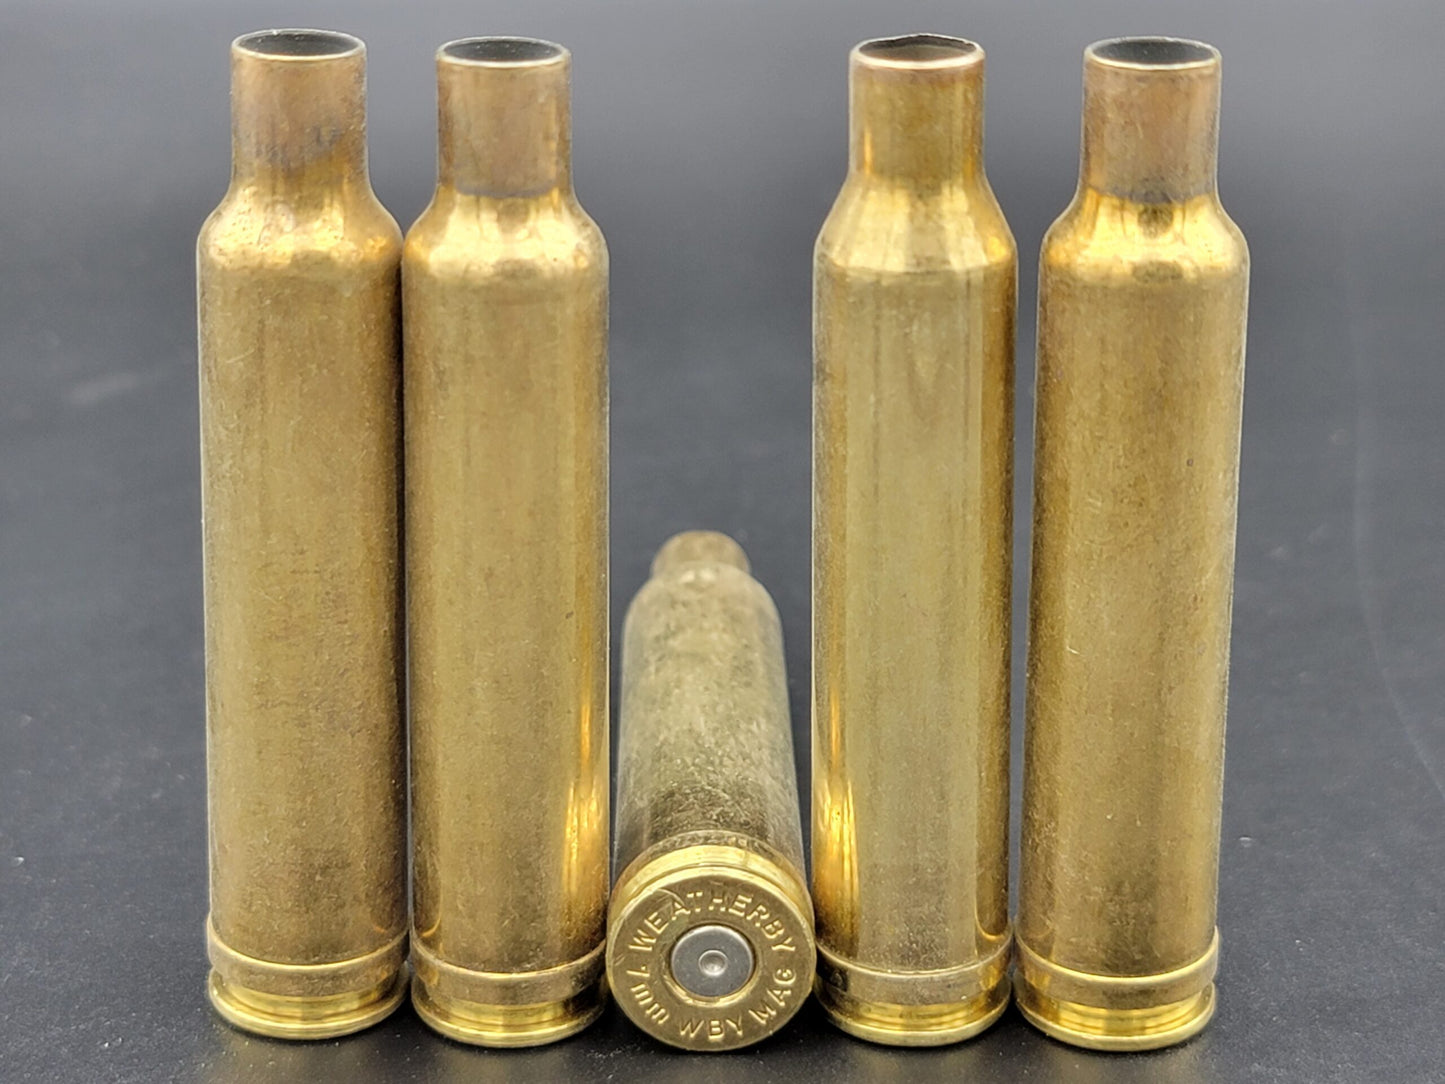 7MM WBY Rifle Brass | 25+ Casings